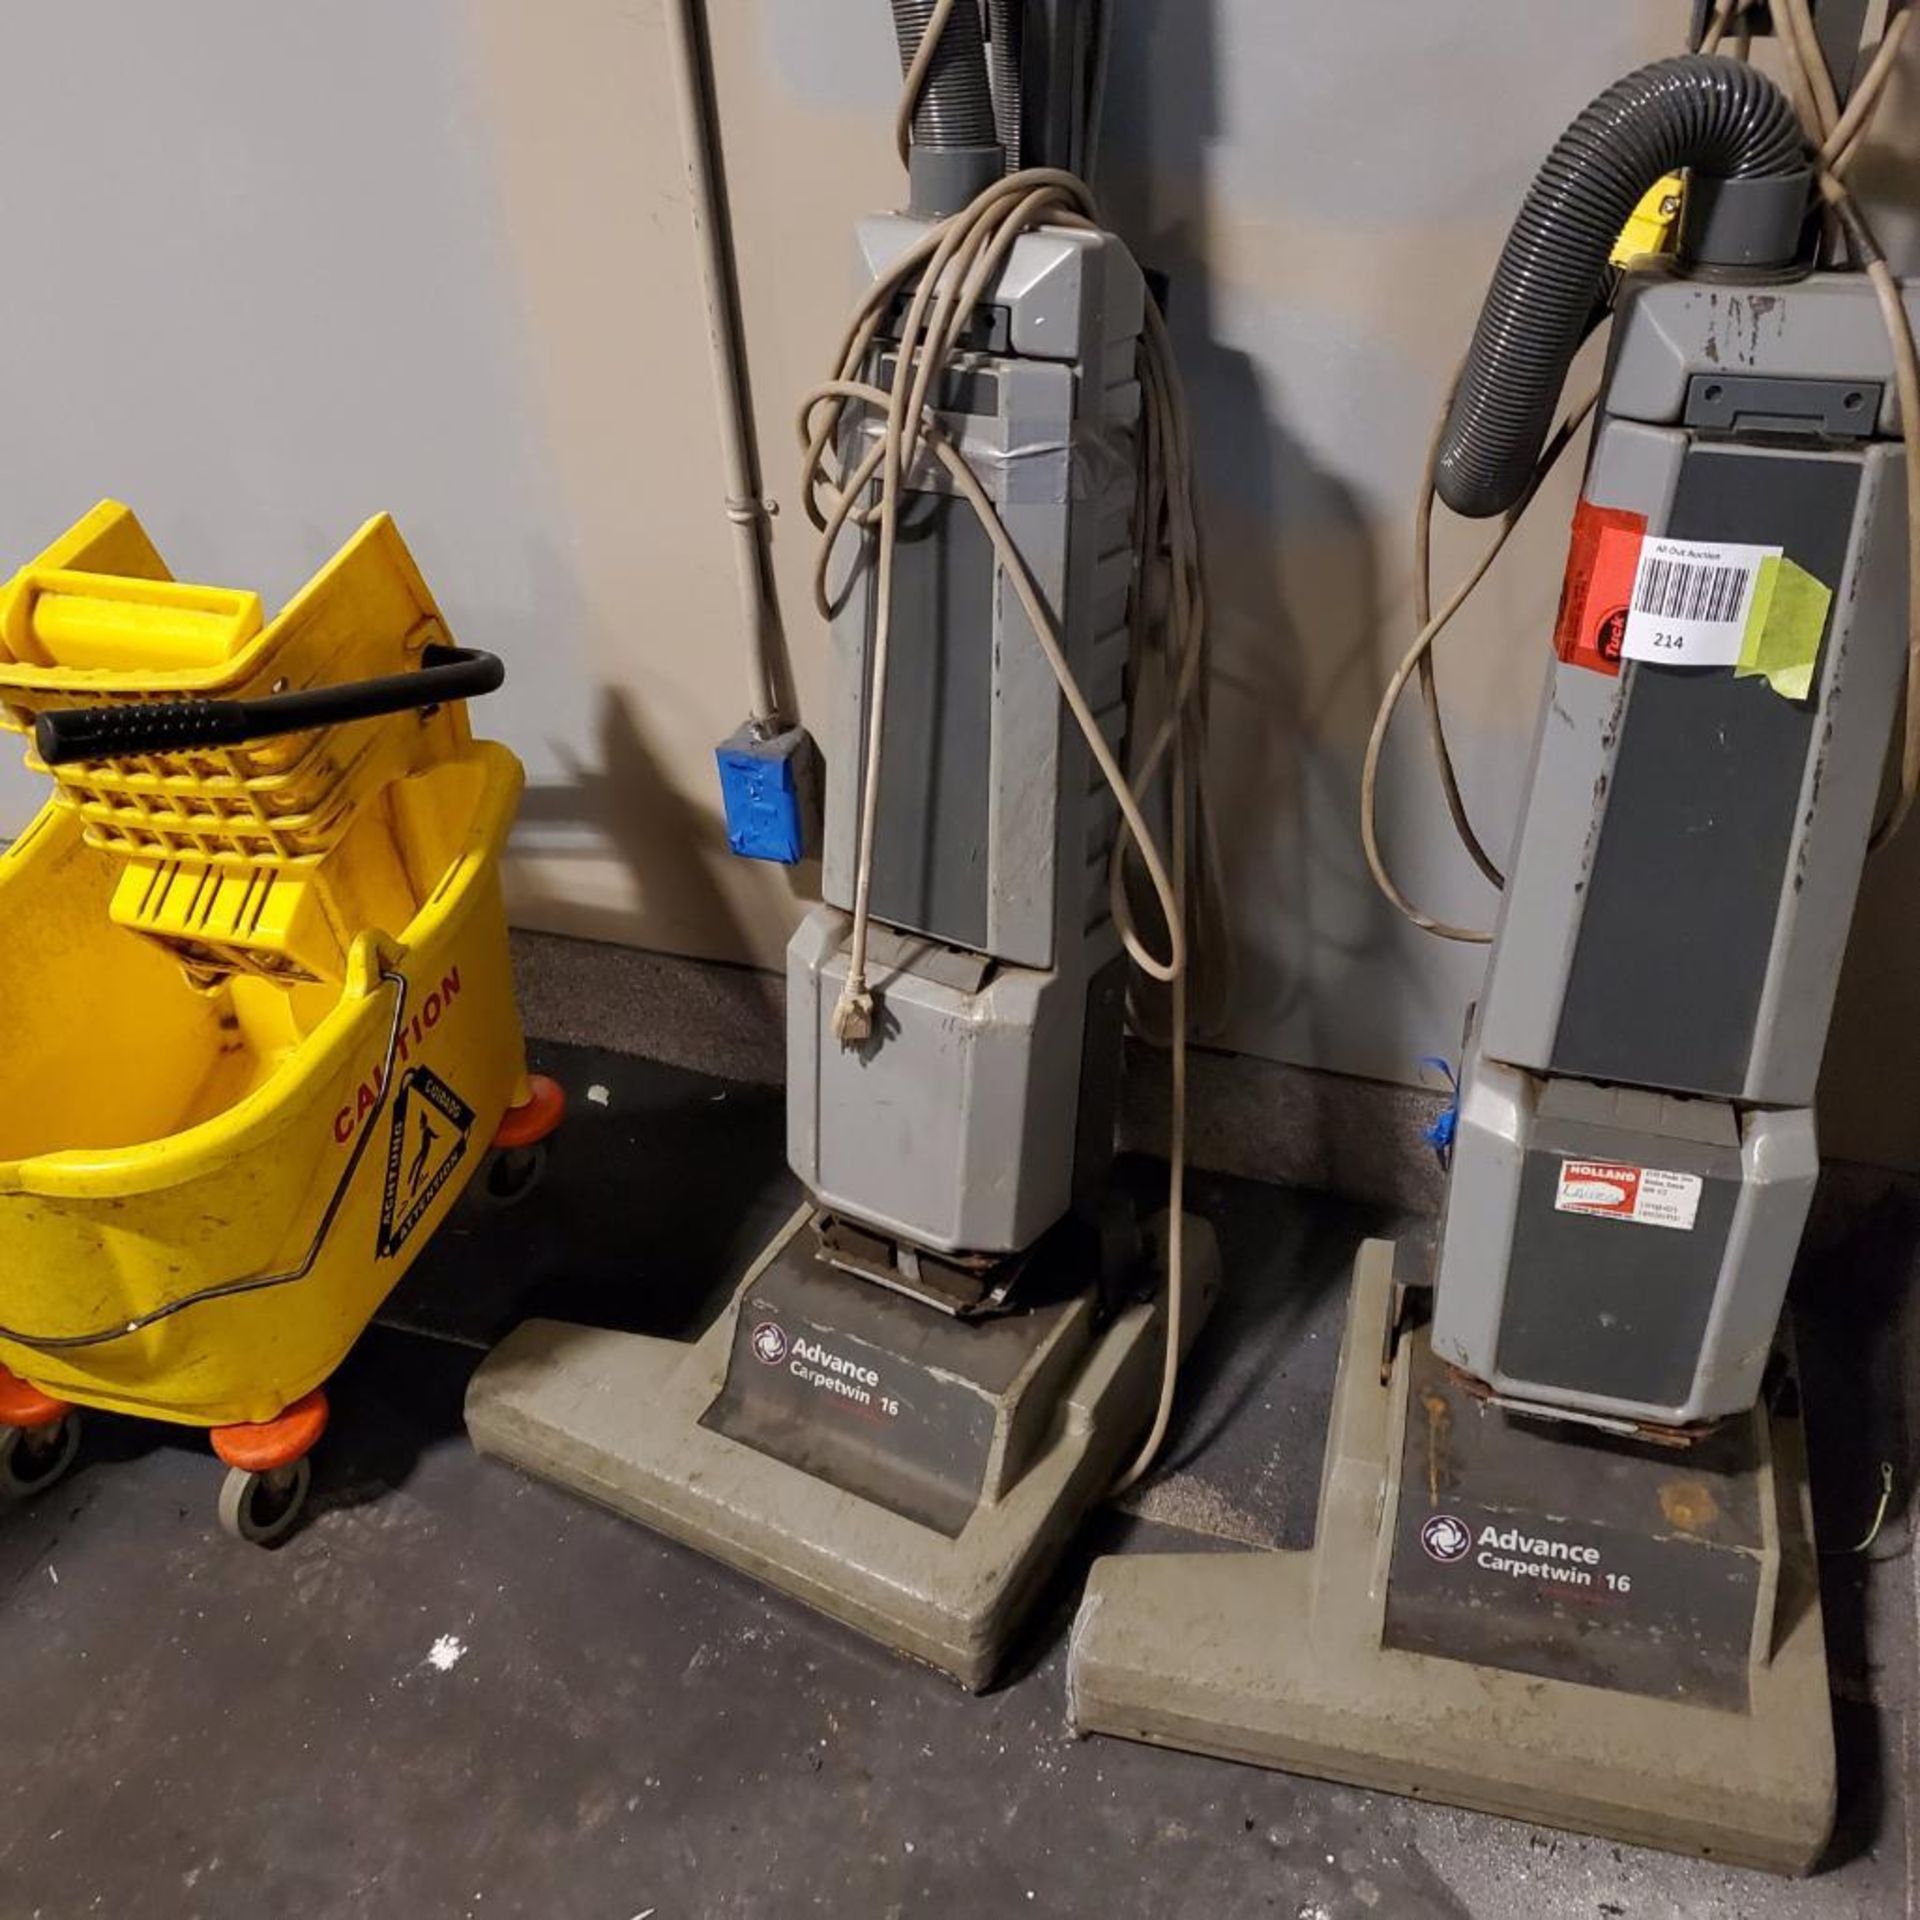 Vacuums and Mop Bucket, Rough. Used, shows commercial use. See pictures.